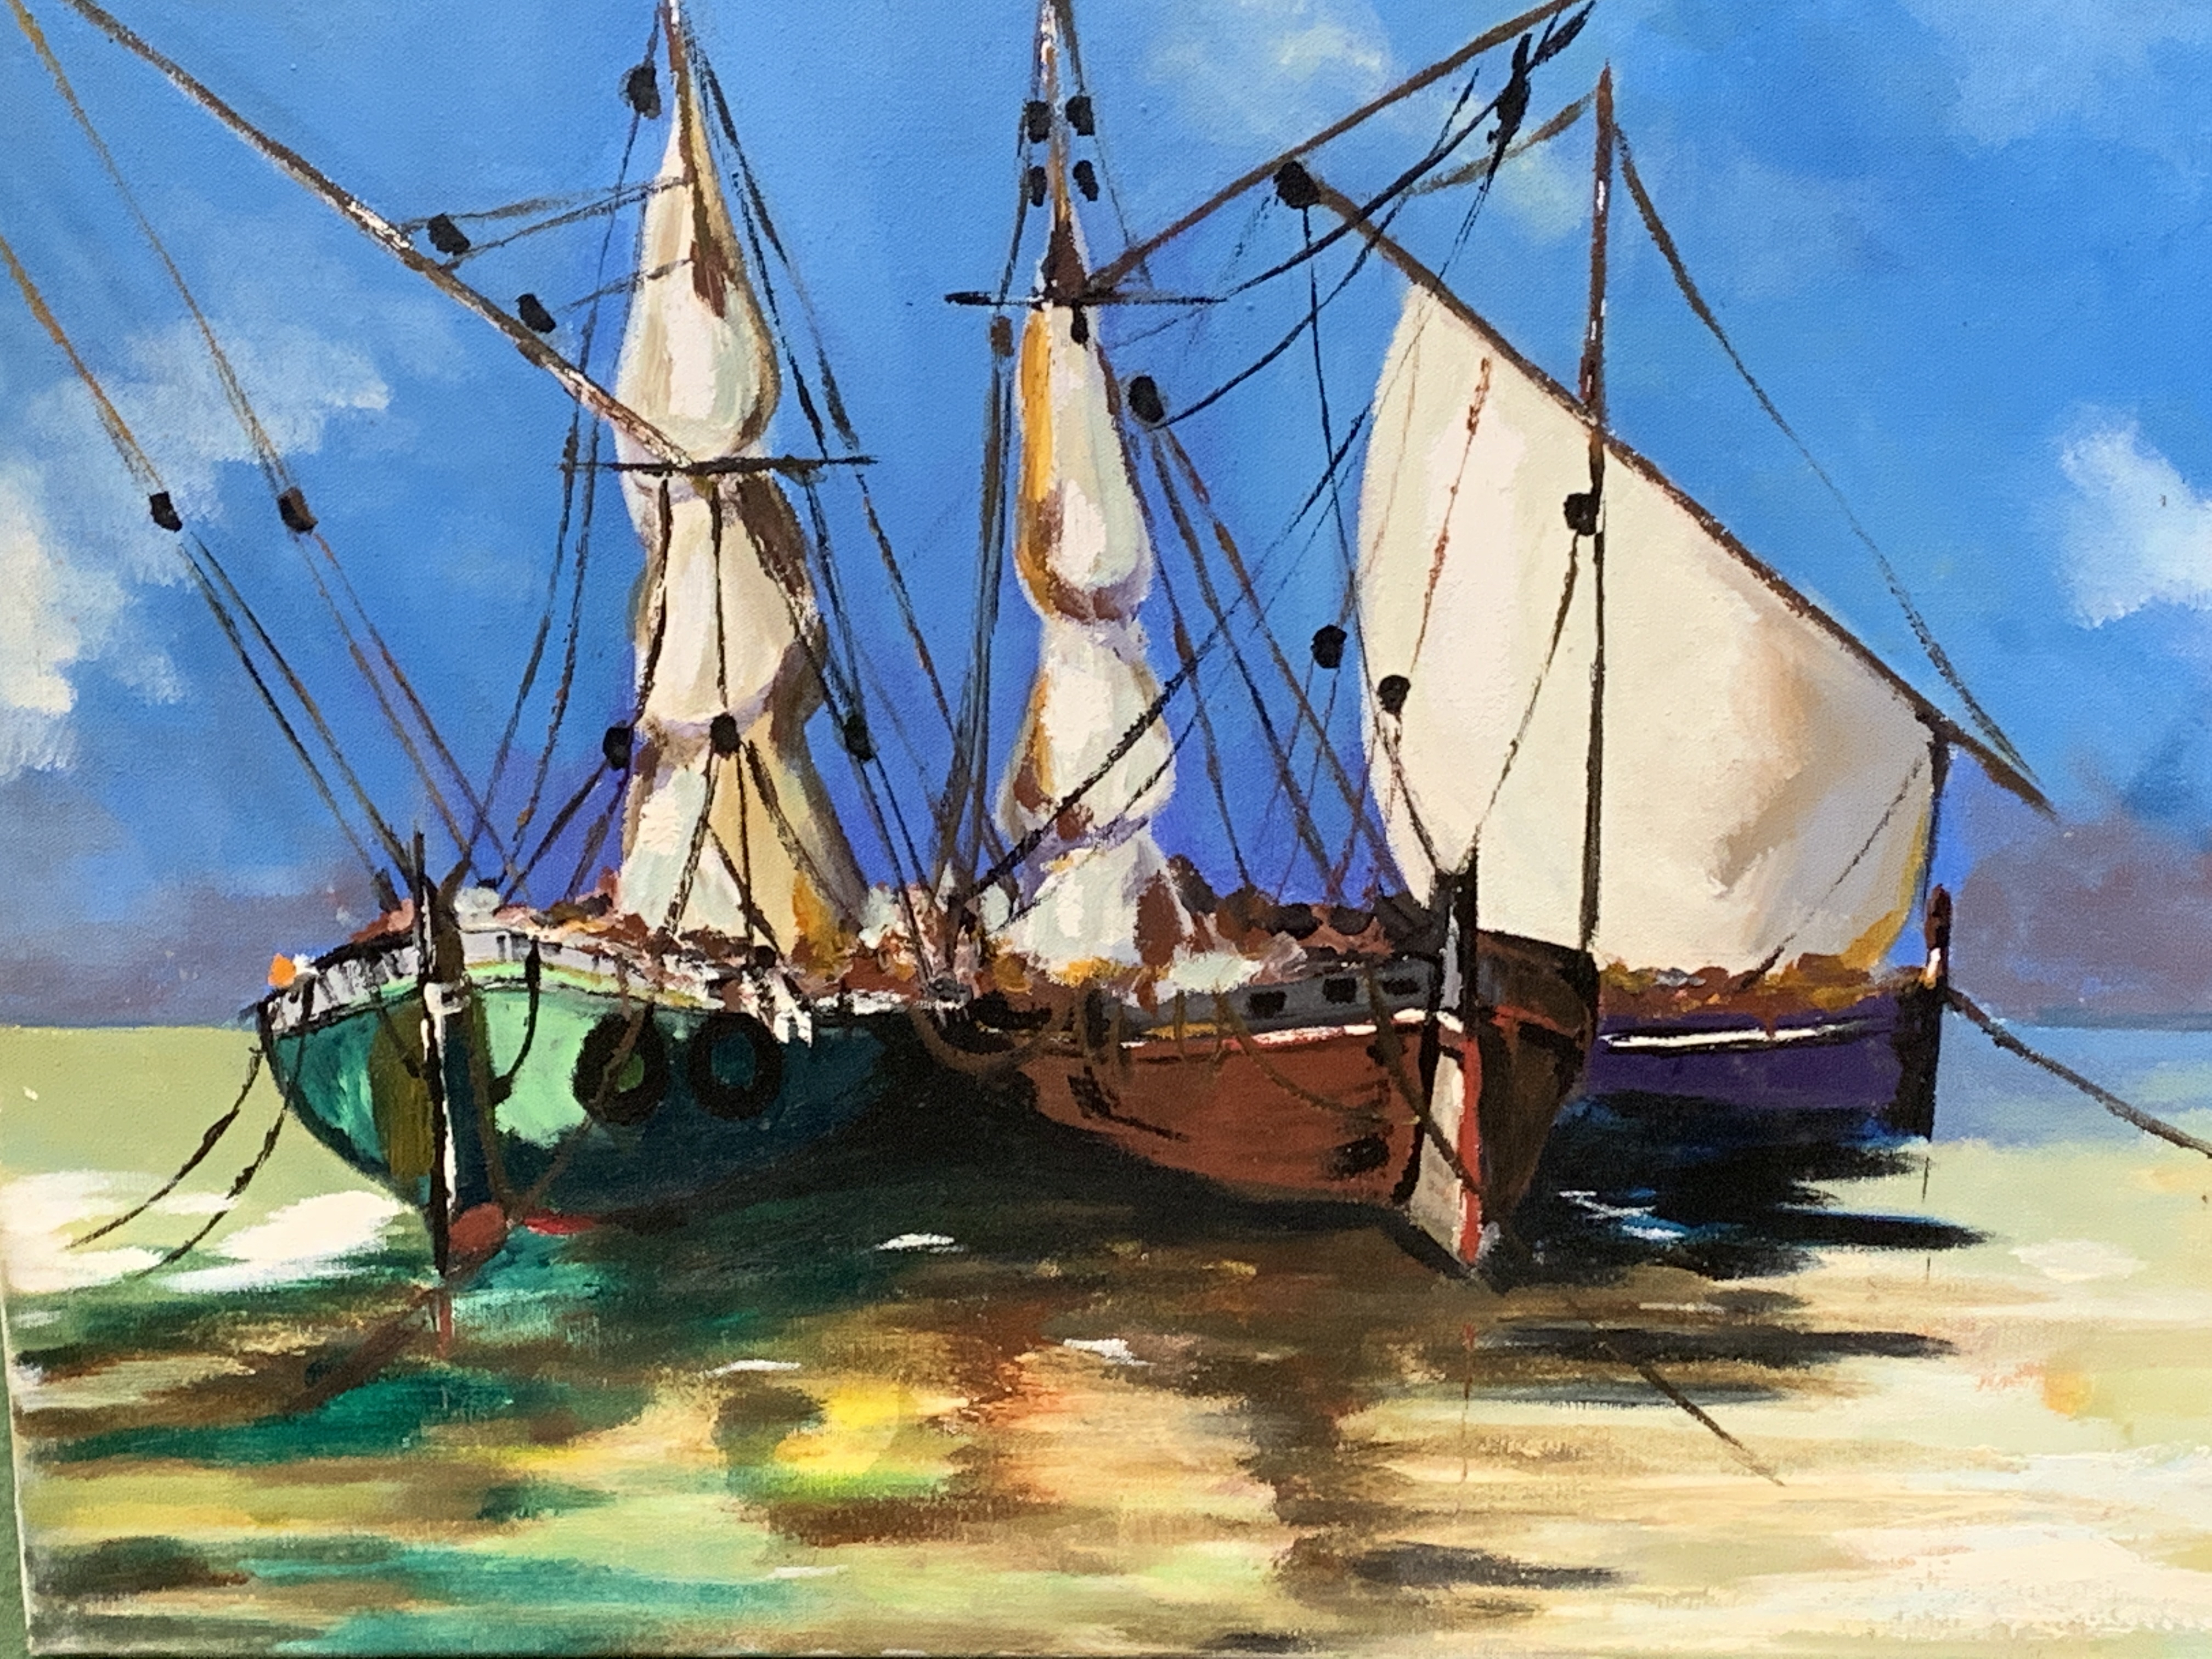 Unframed oil on canvas of sailing boats